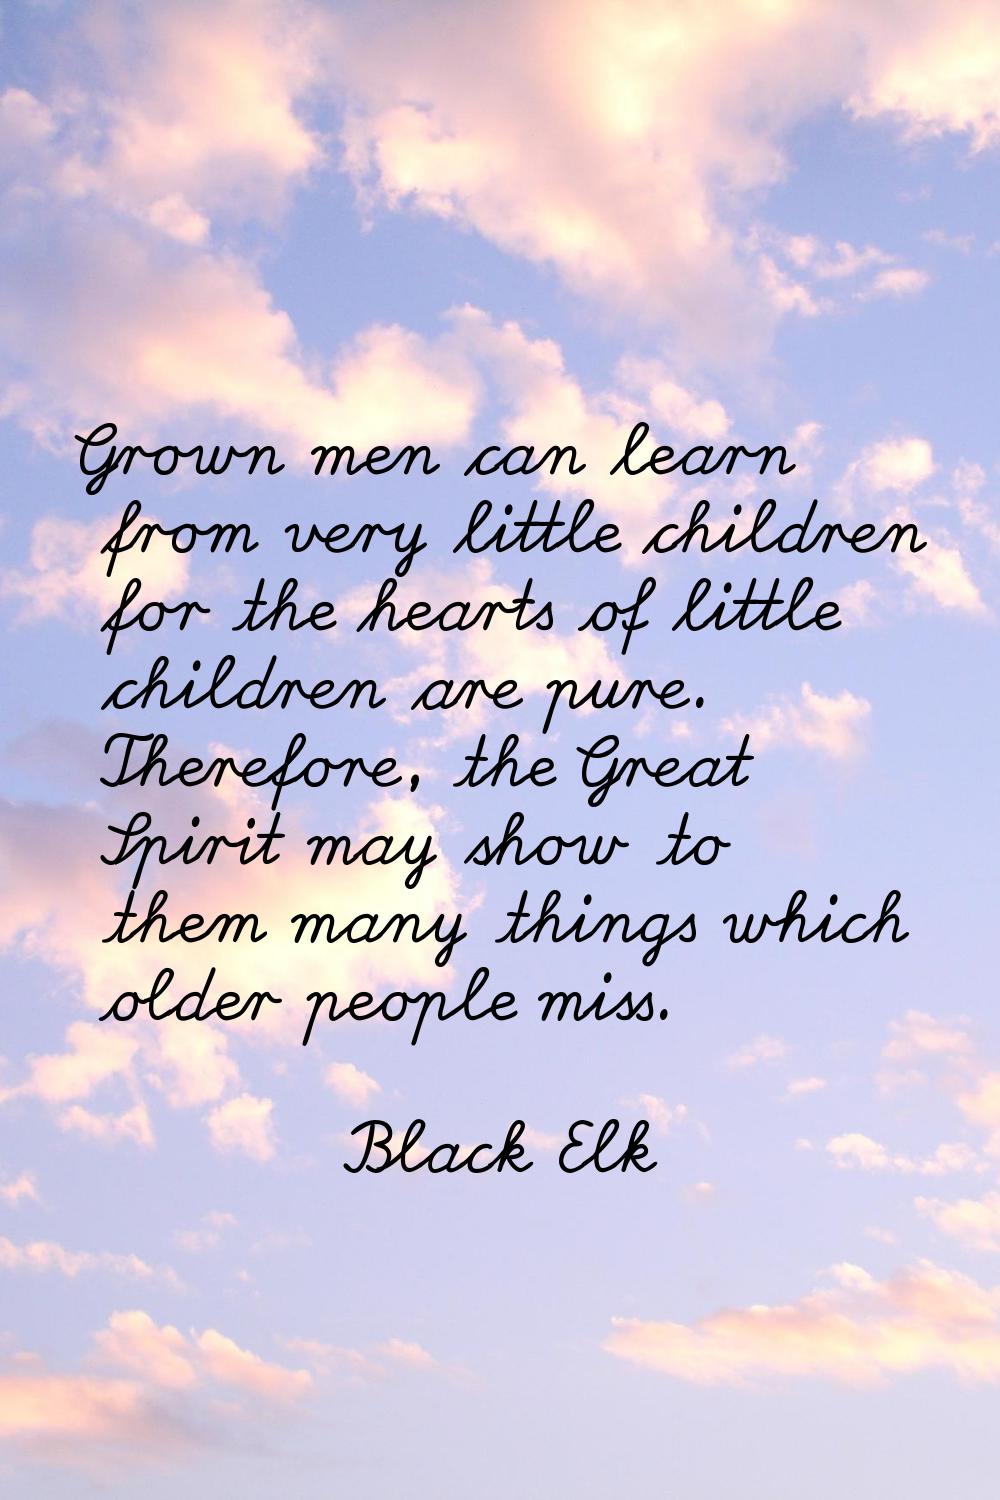 Grown men can learn from very little children for the hearts of little children are pure. Therefore